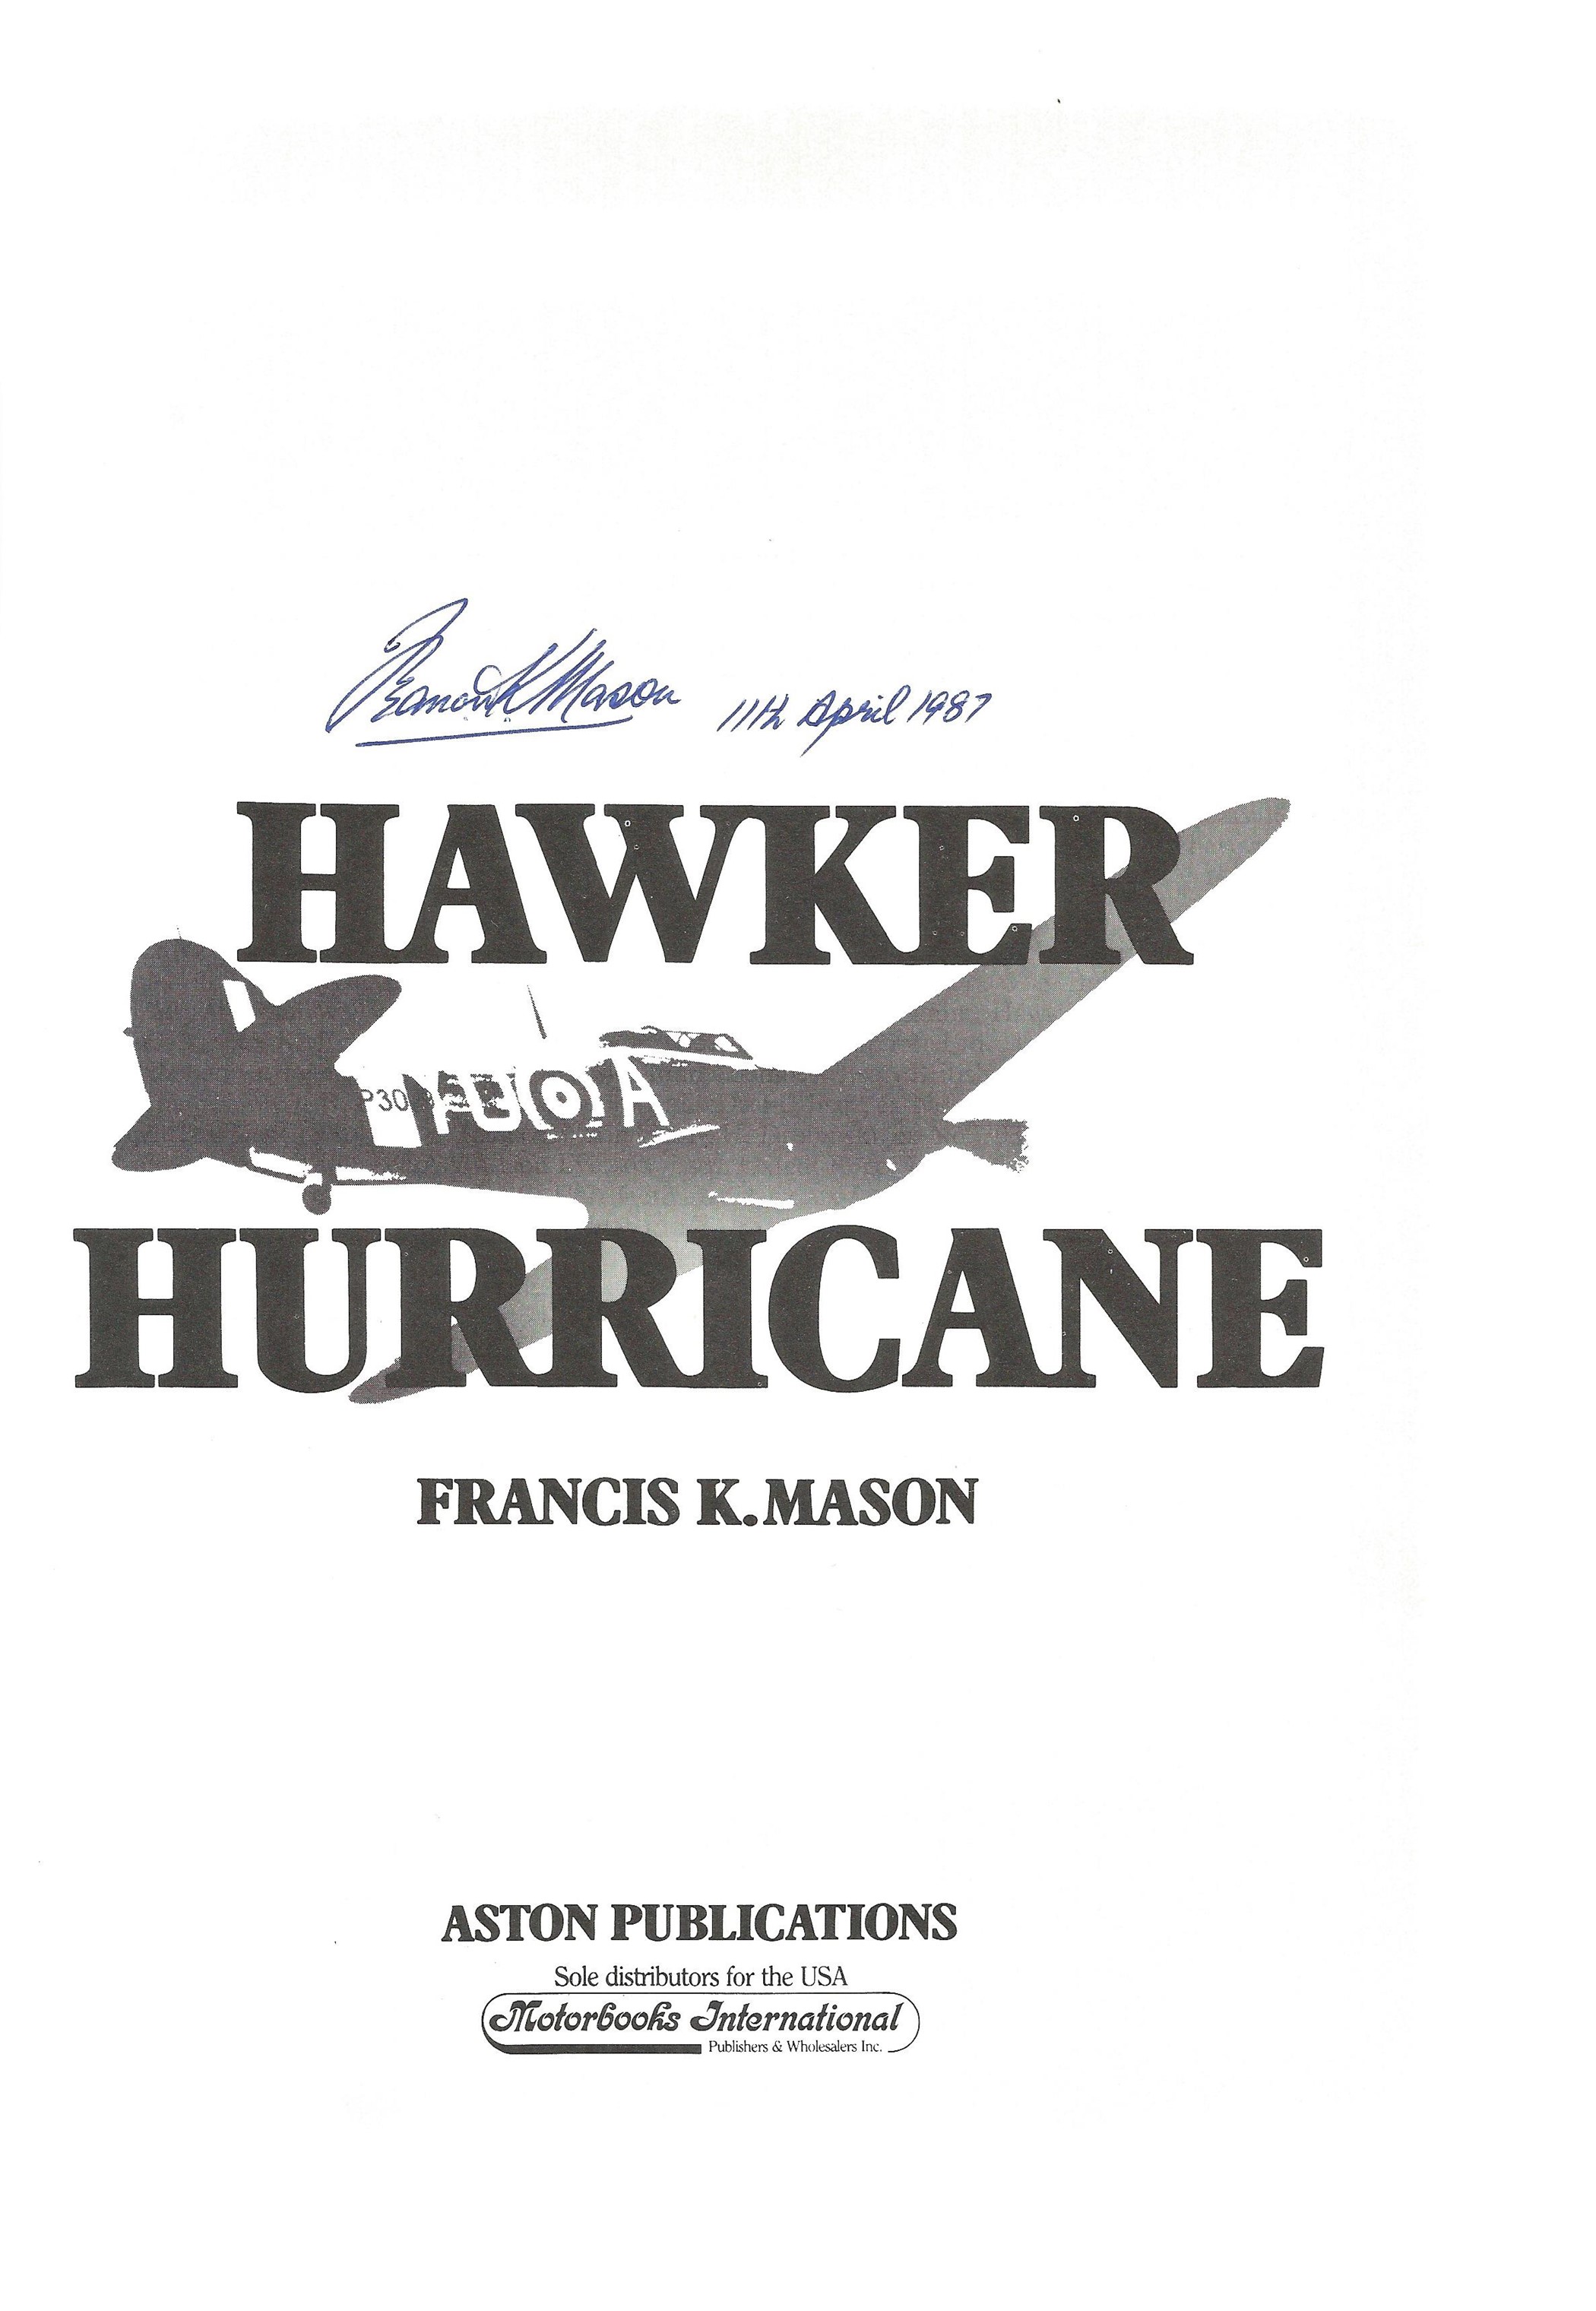 Francis K. Mason. The Hawker Hurricane. A good Hardback book from WW2. First edition, signed by